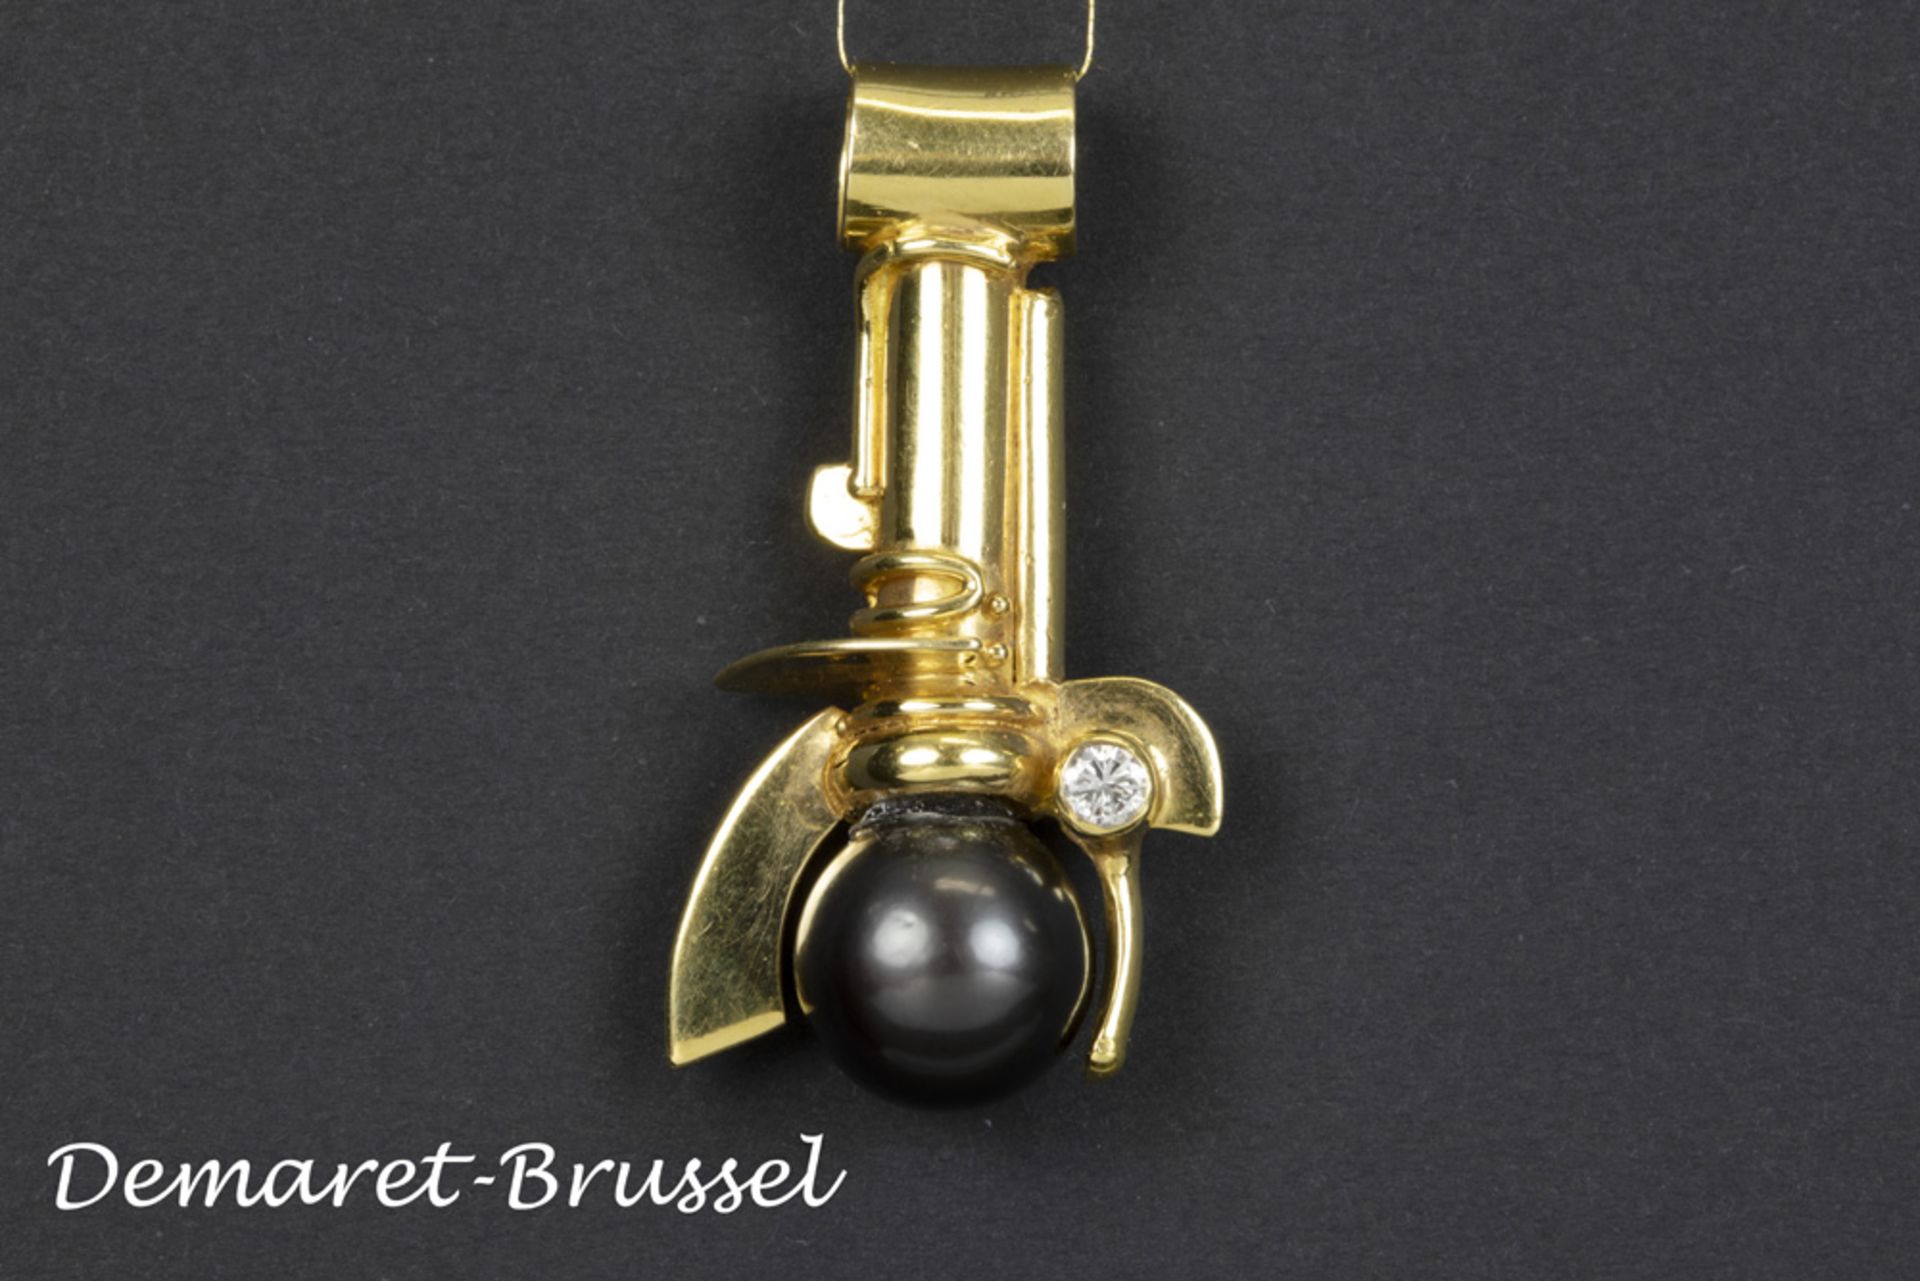 Belgian typical "Demaret" pendant in yellow gold (18 carat) with a ca 0,30 carat high quality